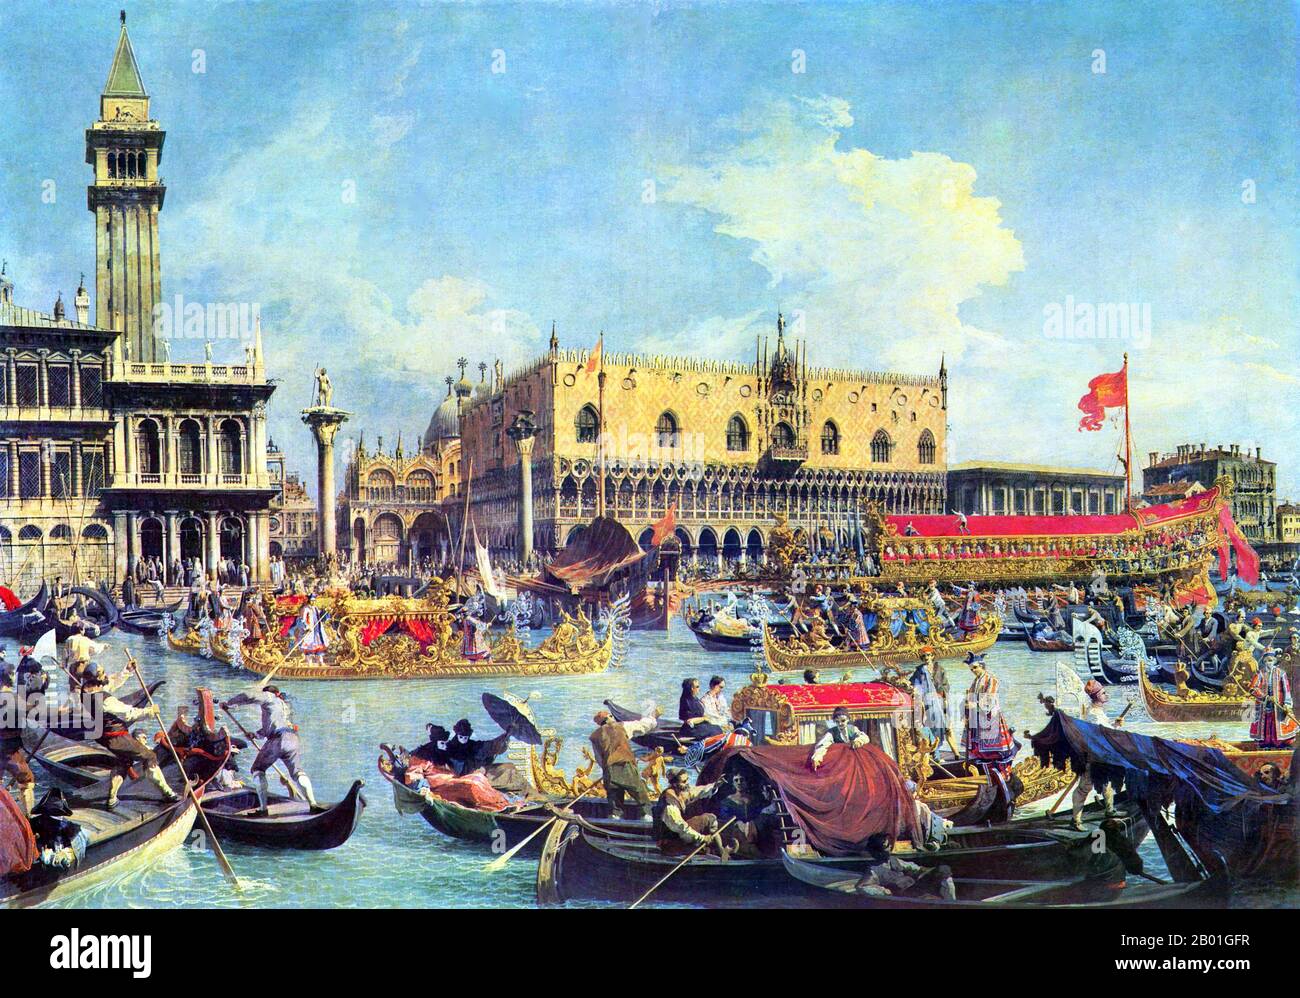 Italy/Venice: 'The Bucintoro Returning to the Molo on Ascension Day'. Oil on canvas painting by Canaletto (18 October 1697 - 10 April 1768), 1732.  For centuries Venice was Europe’s prime trading partner with the Middle East and the Byzantine Empire in particular. Venetian naval and commercial power was unrivalled in Europe until it lost a series of wars to the Ottoman armies in the 15th century. The city lost some 50,000 people to the Black Death in 1575-1577, but remained a major manufacturing centre and port well into the 18th century. Stock Photo